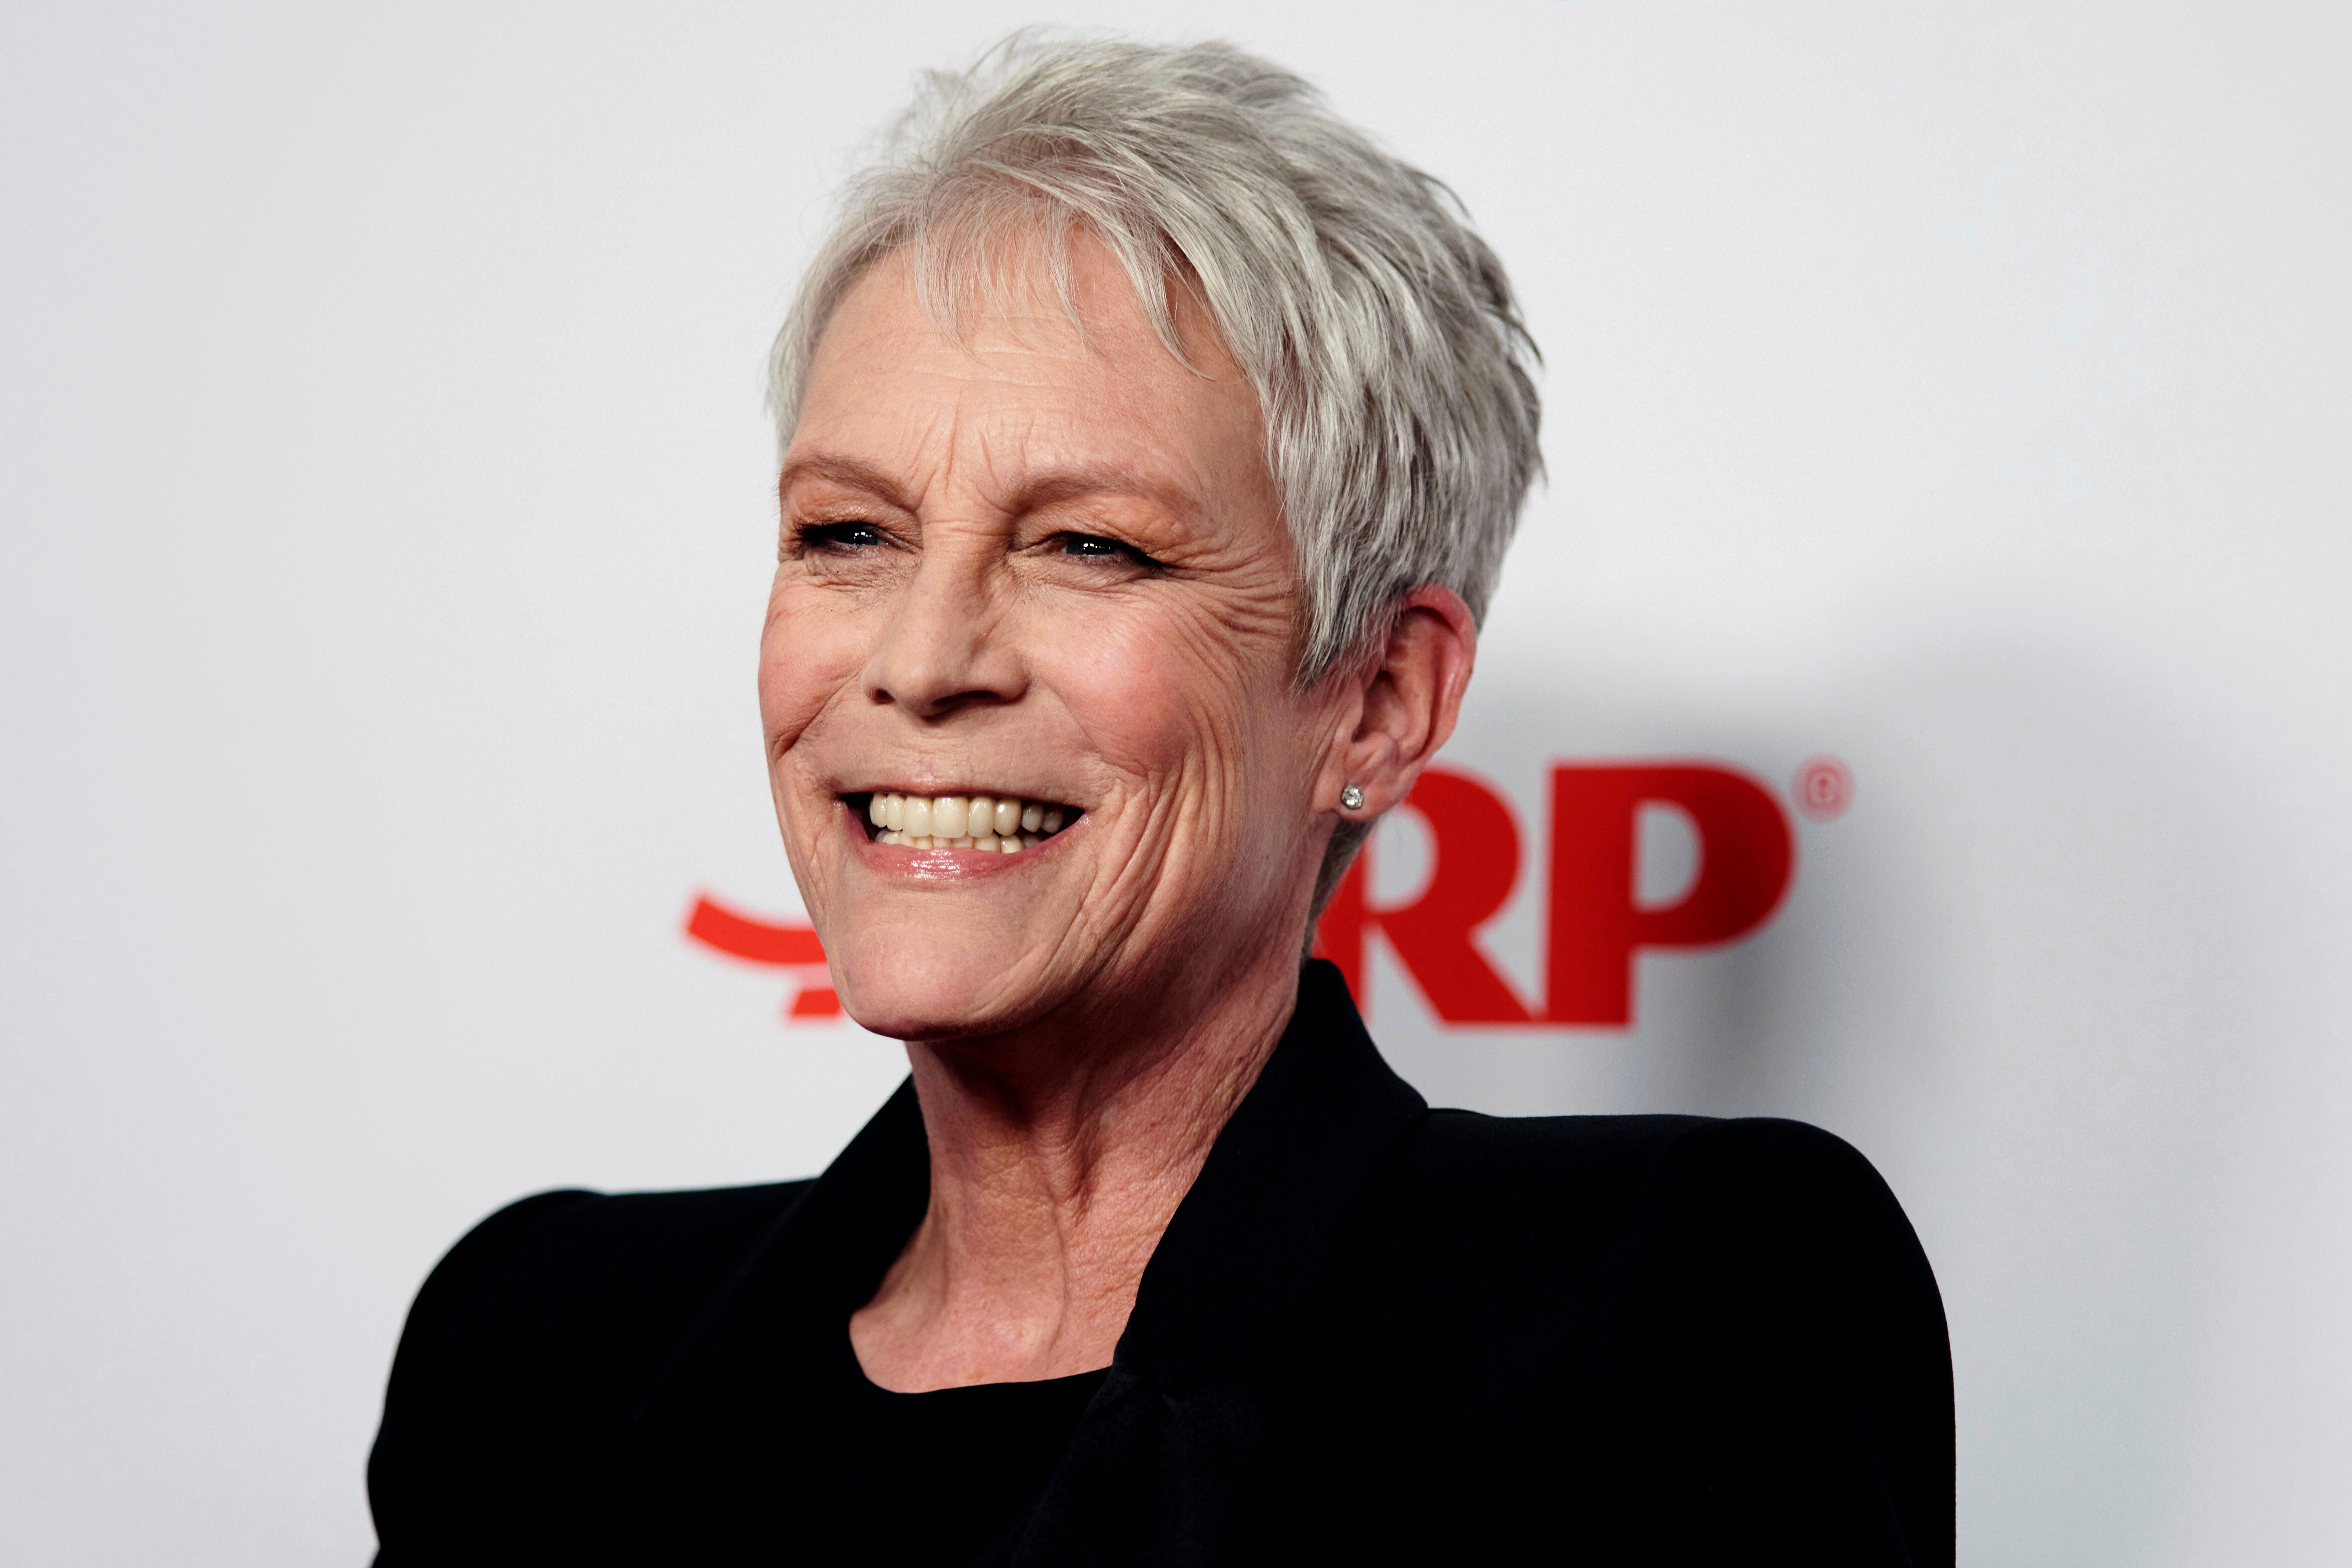 Jamie Lee Curtis gets career achievement honor at AARP Awards: 'I really like being a grown-up'